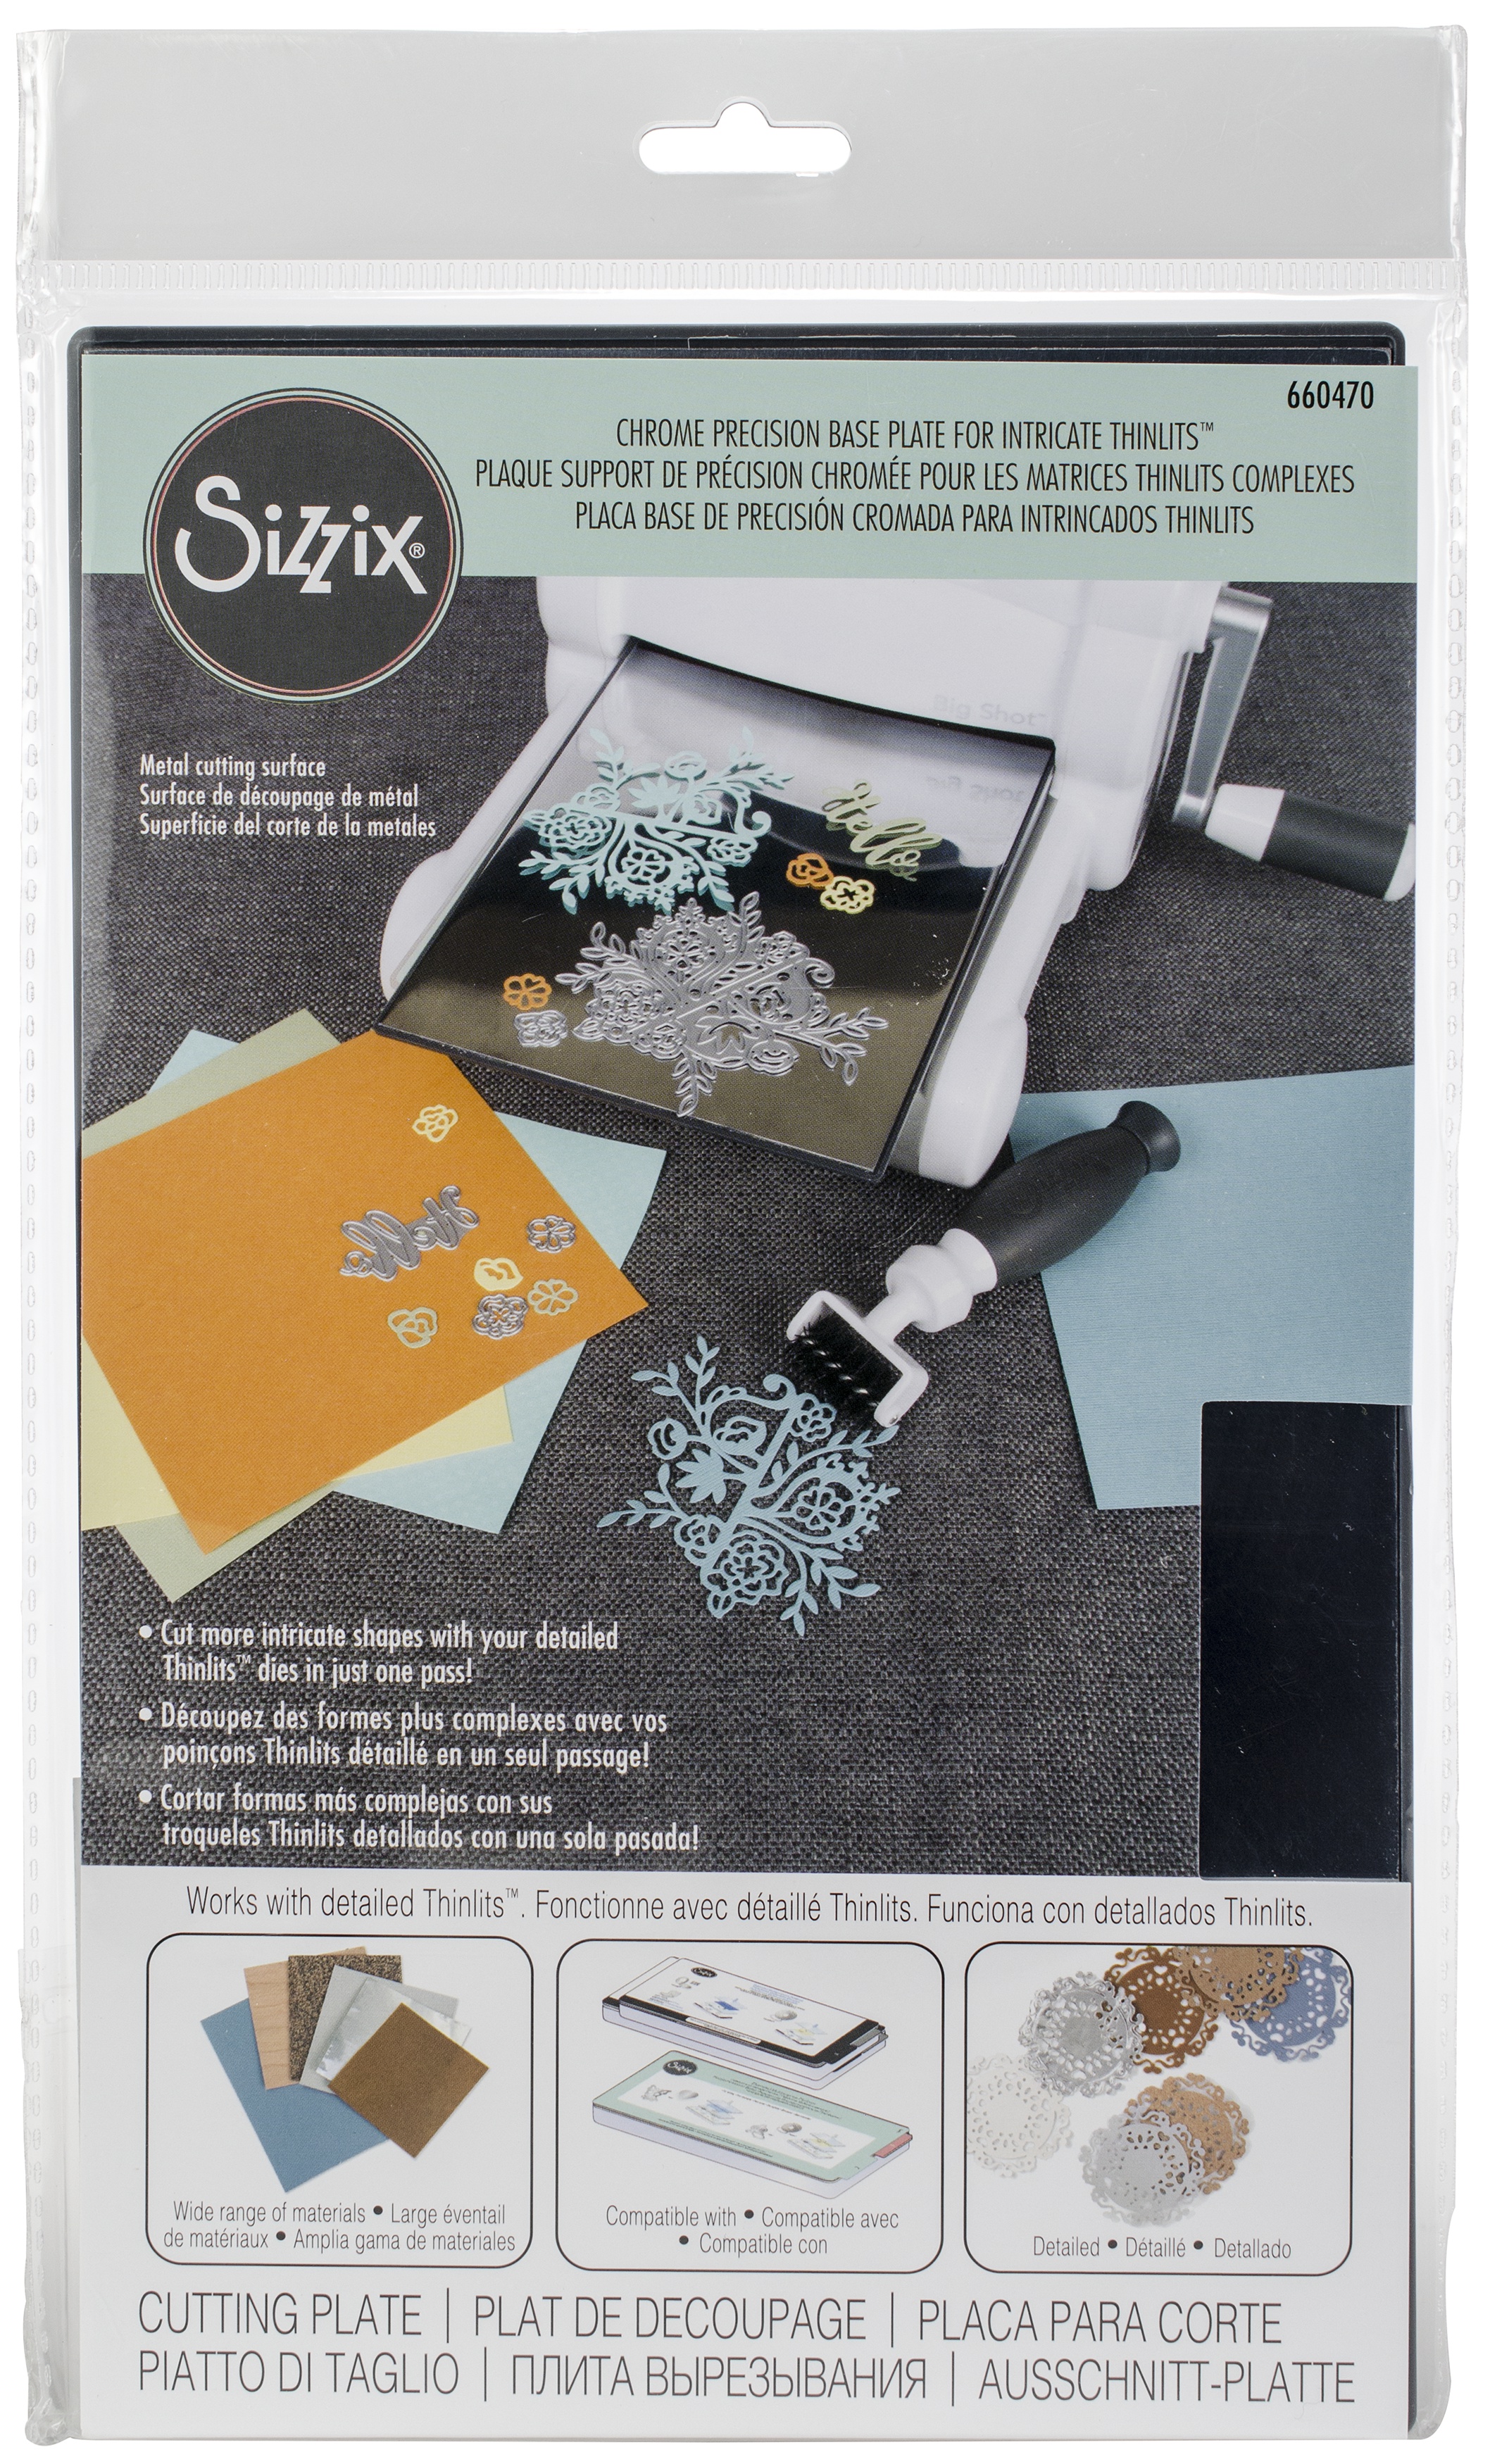 Sizzix Chrome Precision Base Plate For Intricate Thinlits